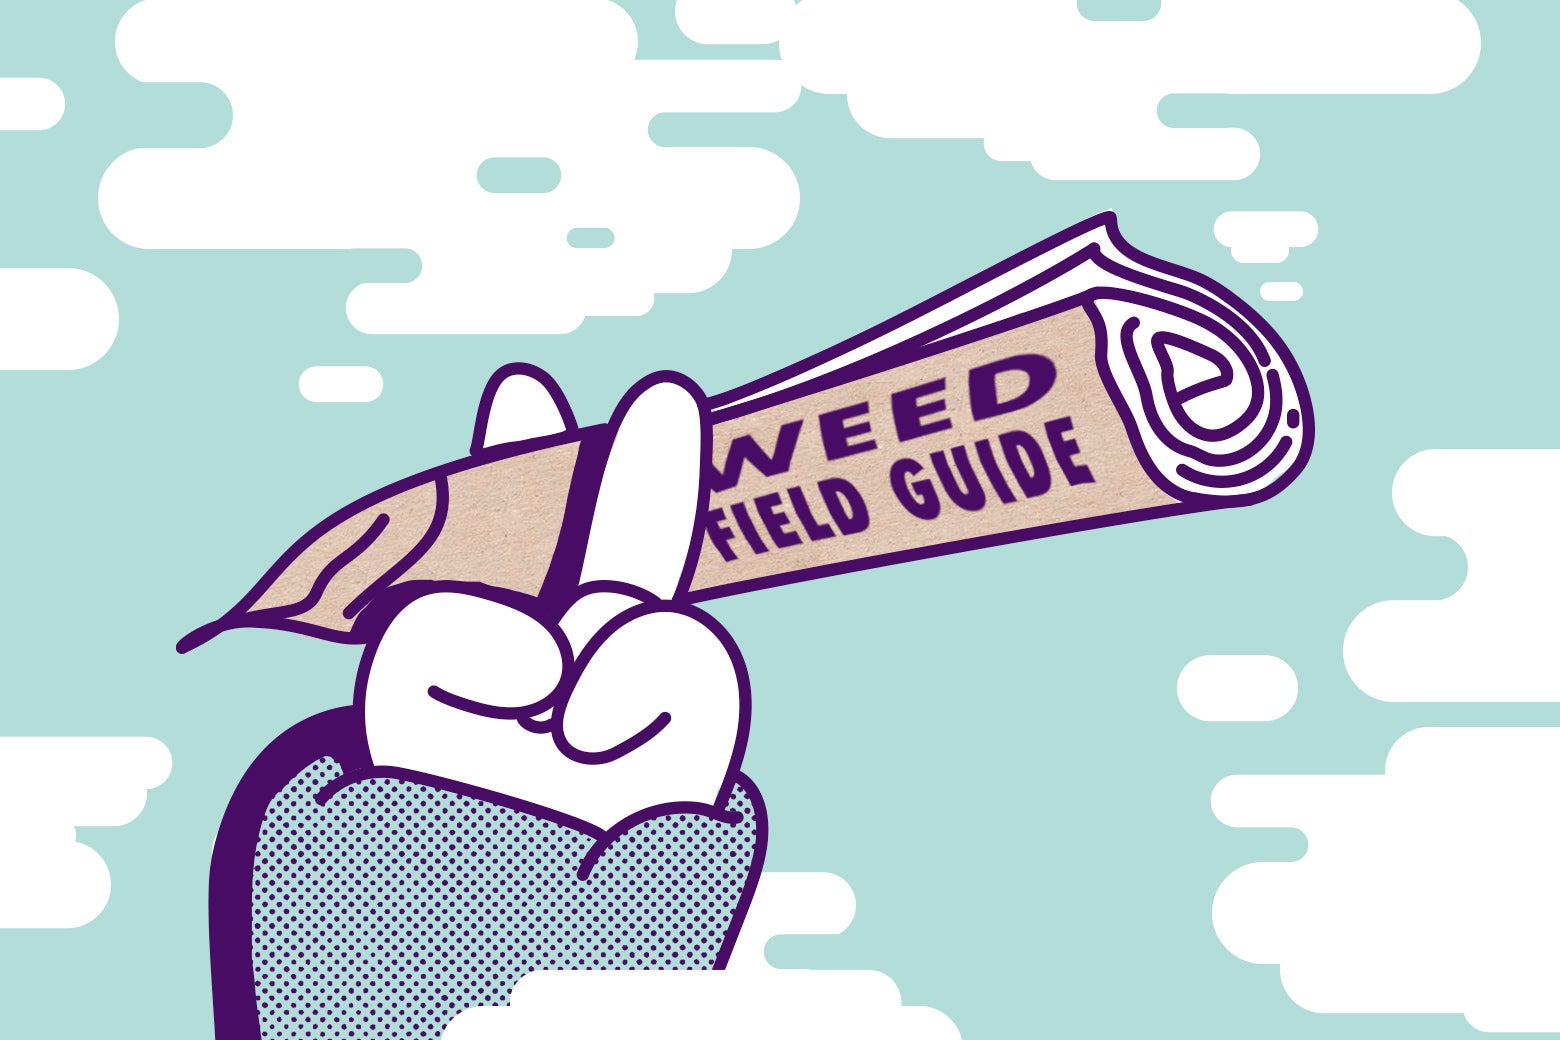 Two fingers forming a peace sign and cradling a jointlike pamphlet titled Weed Field Guide, surrounded by marijuana smoke.